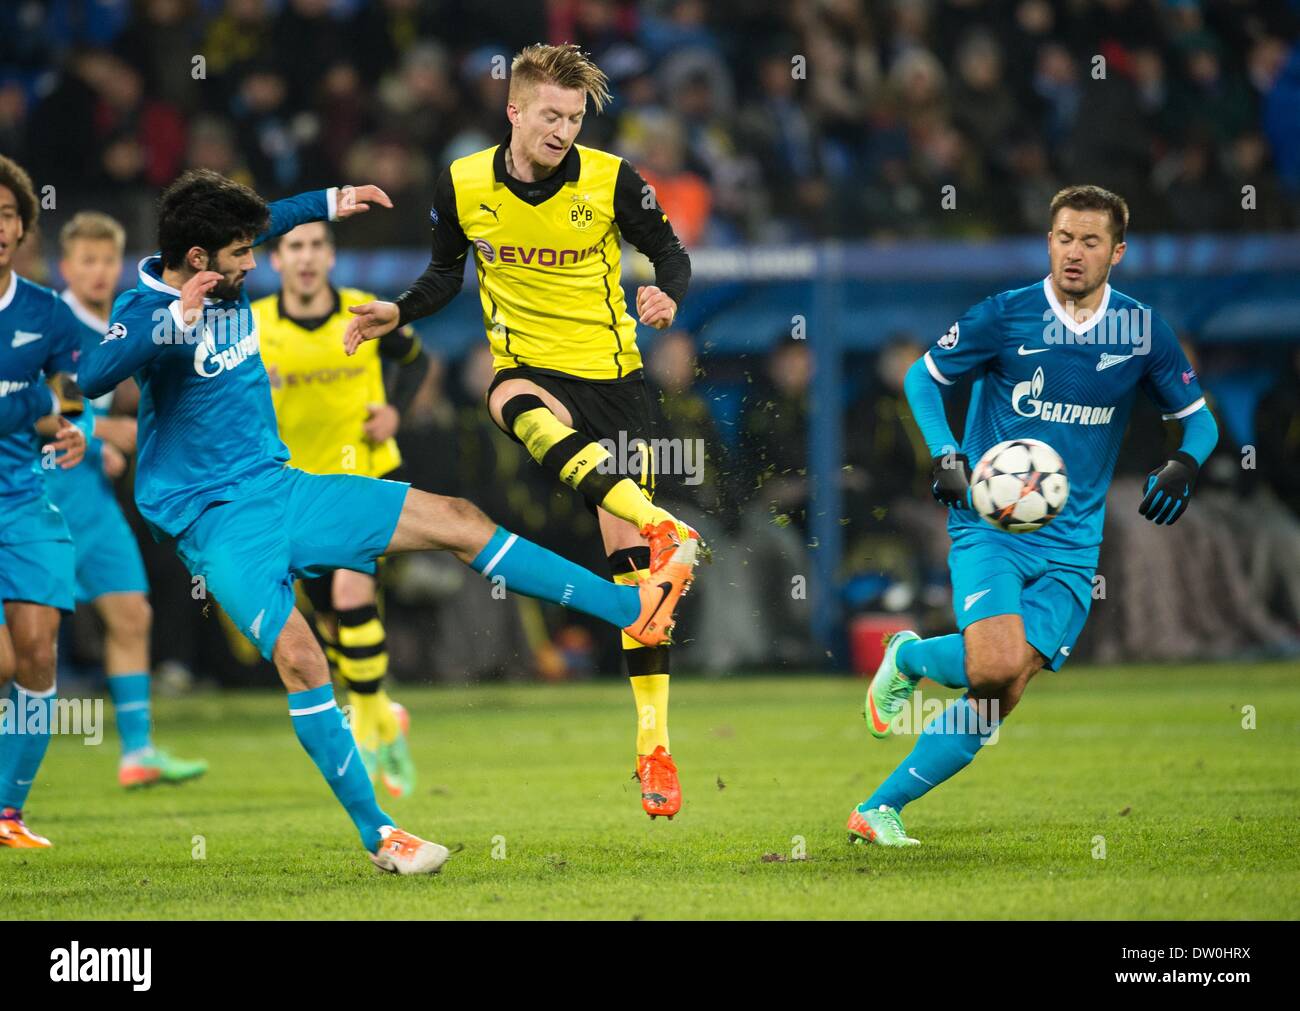 St. Peterburg, Russia. 25th Feb, 2014. Dortmund's Marco Reus (C) vies for the Ball with Zenit's Luis Neto and Viktor Fayzulin (R) during the UEFA Champions League round of 16 first leg soccer match between Zenit St. Petersburg and Borussia Dortmund at Petrowski stadium in St. Peterburg, Russia, 25 February 2014. Photo: Bernd Thissen/dpa/Alamy Live News Stock Photo